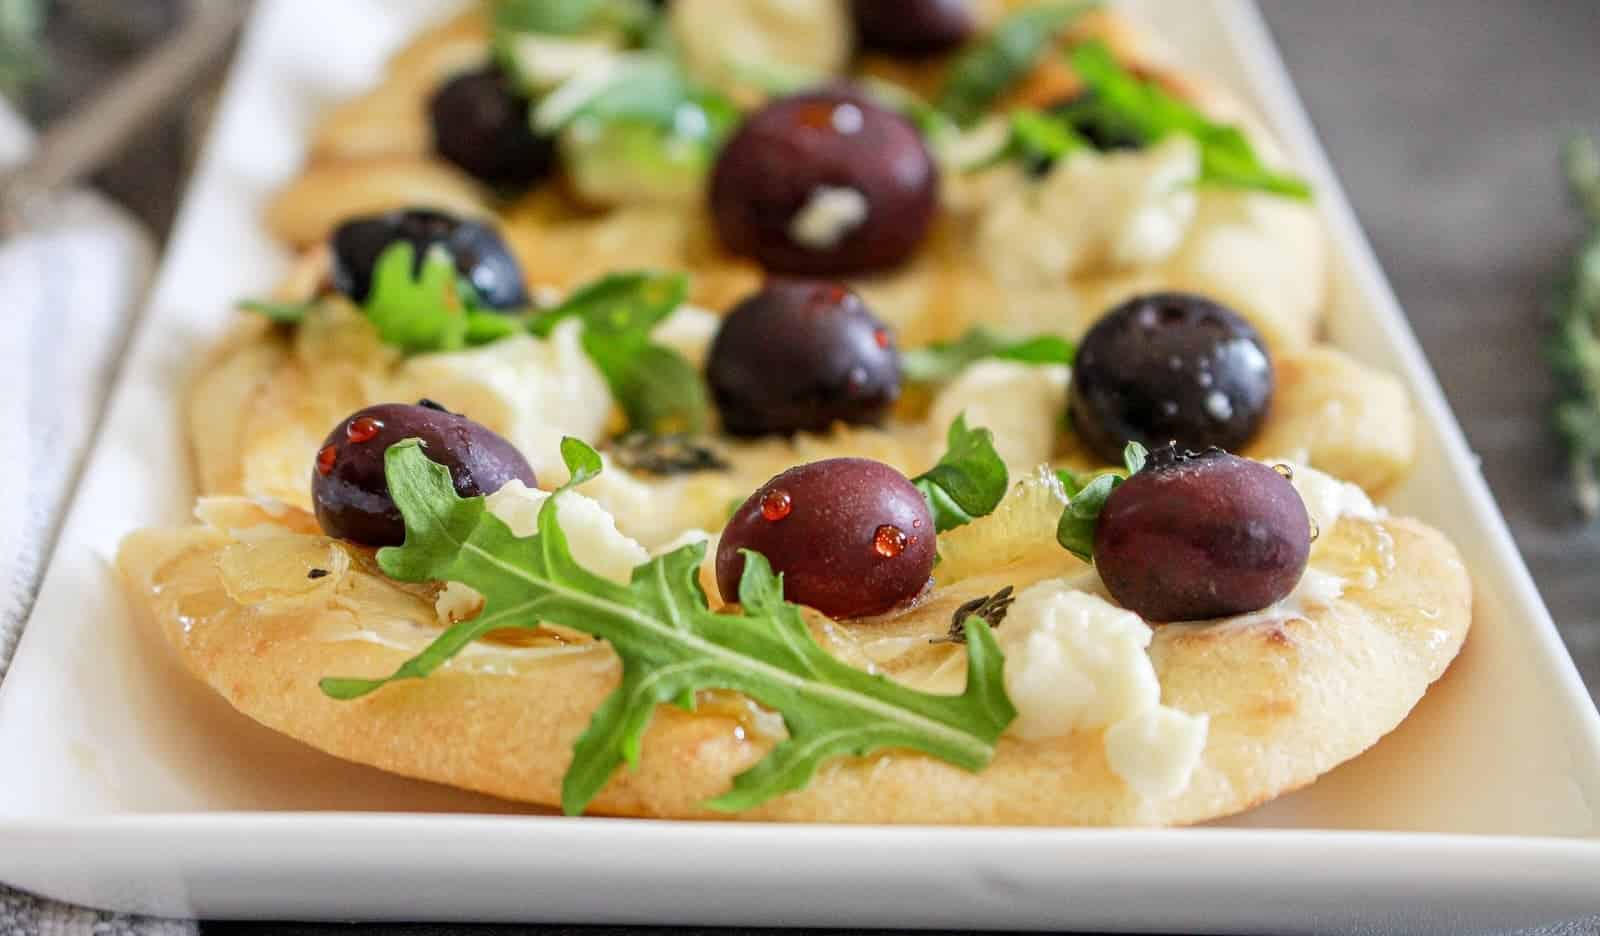 A close-up of a goat cheese flatbreads topped with caramelized onions, arugula, and black blueberries, served on a white plate.